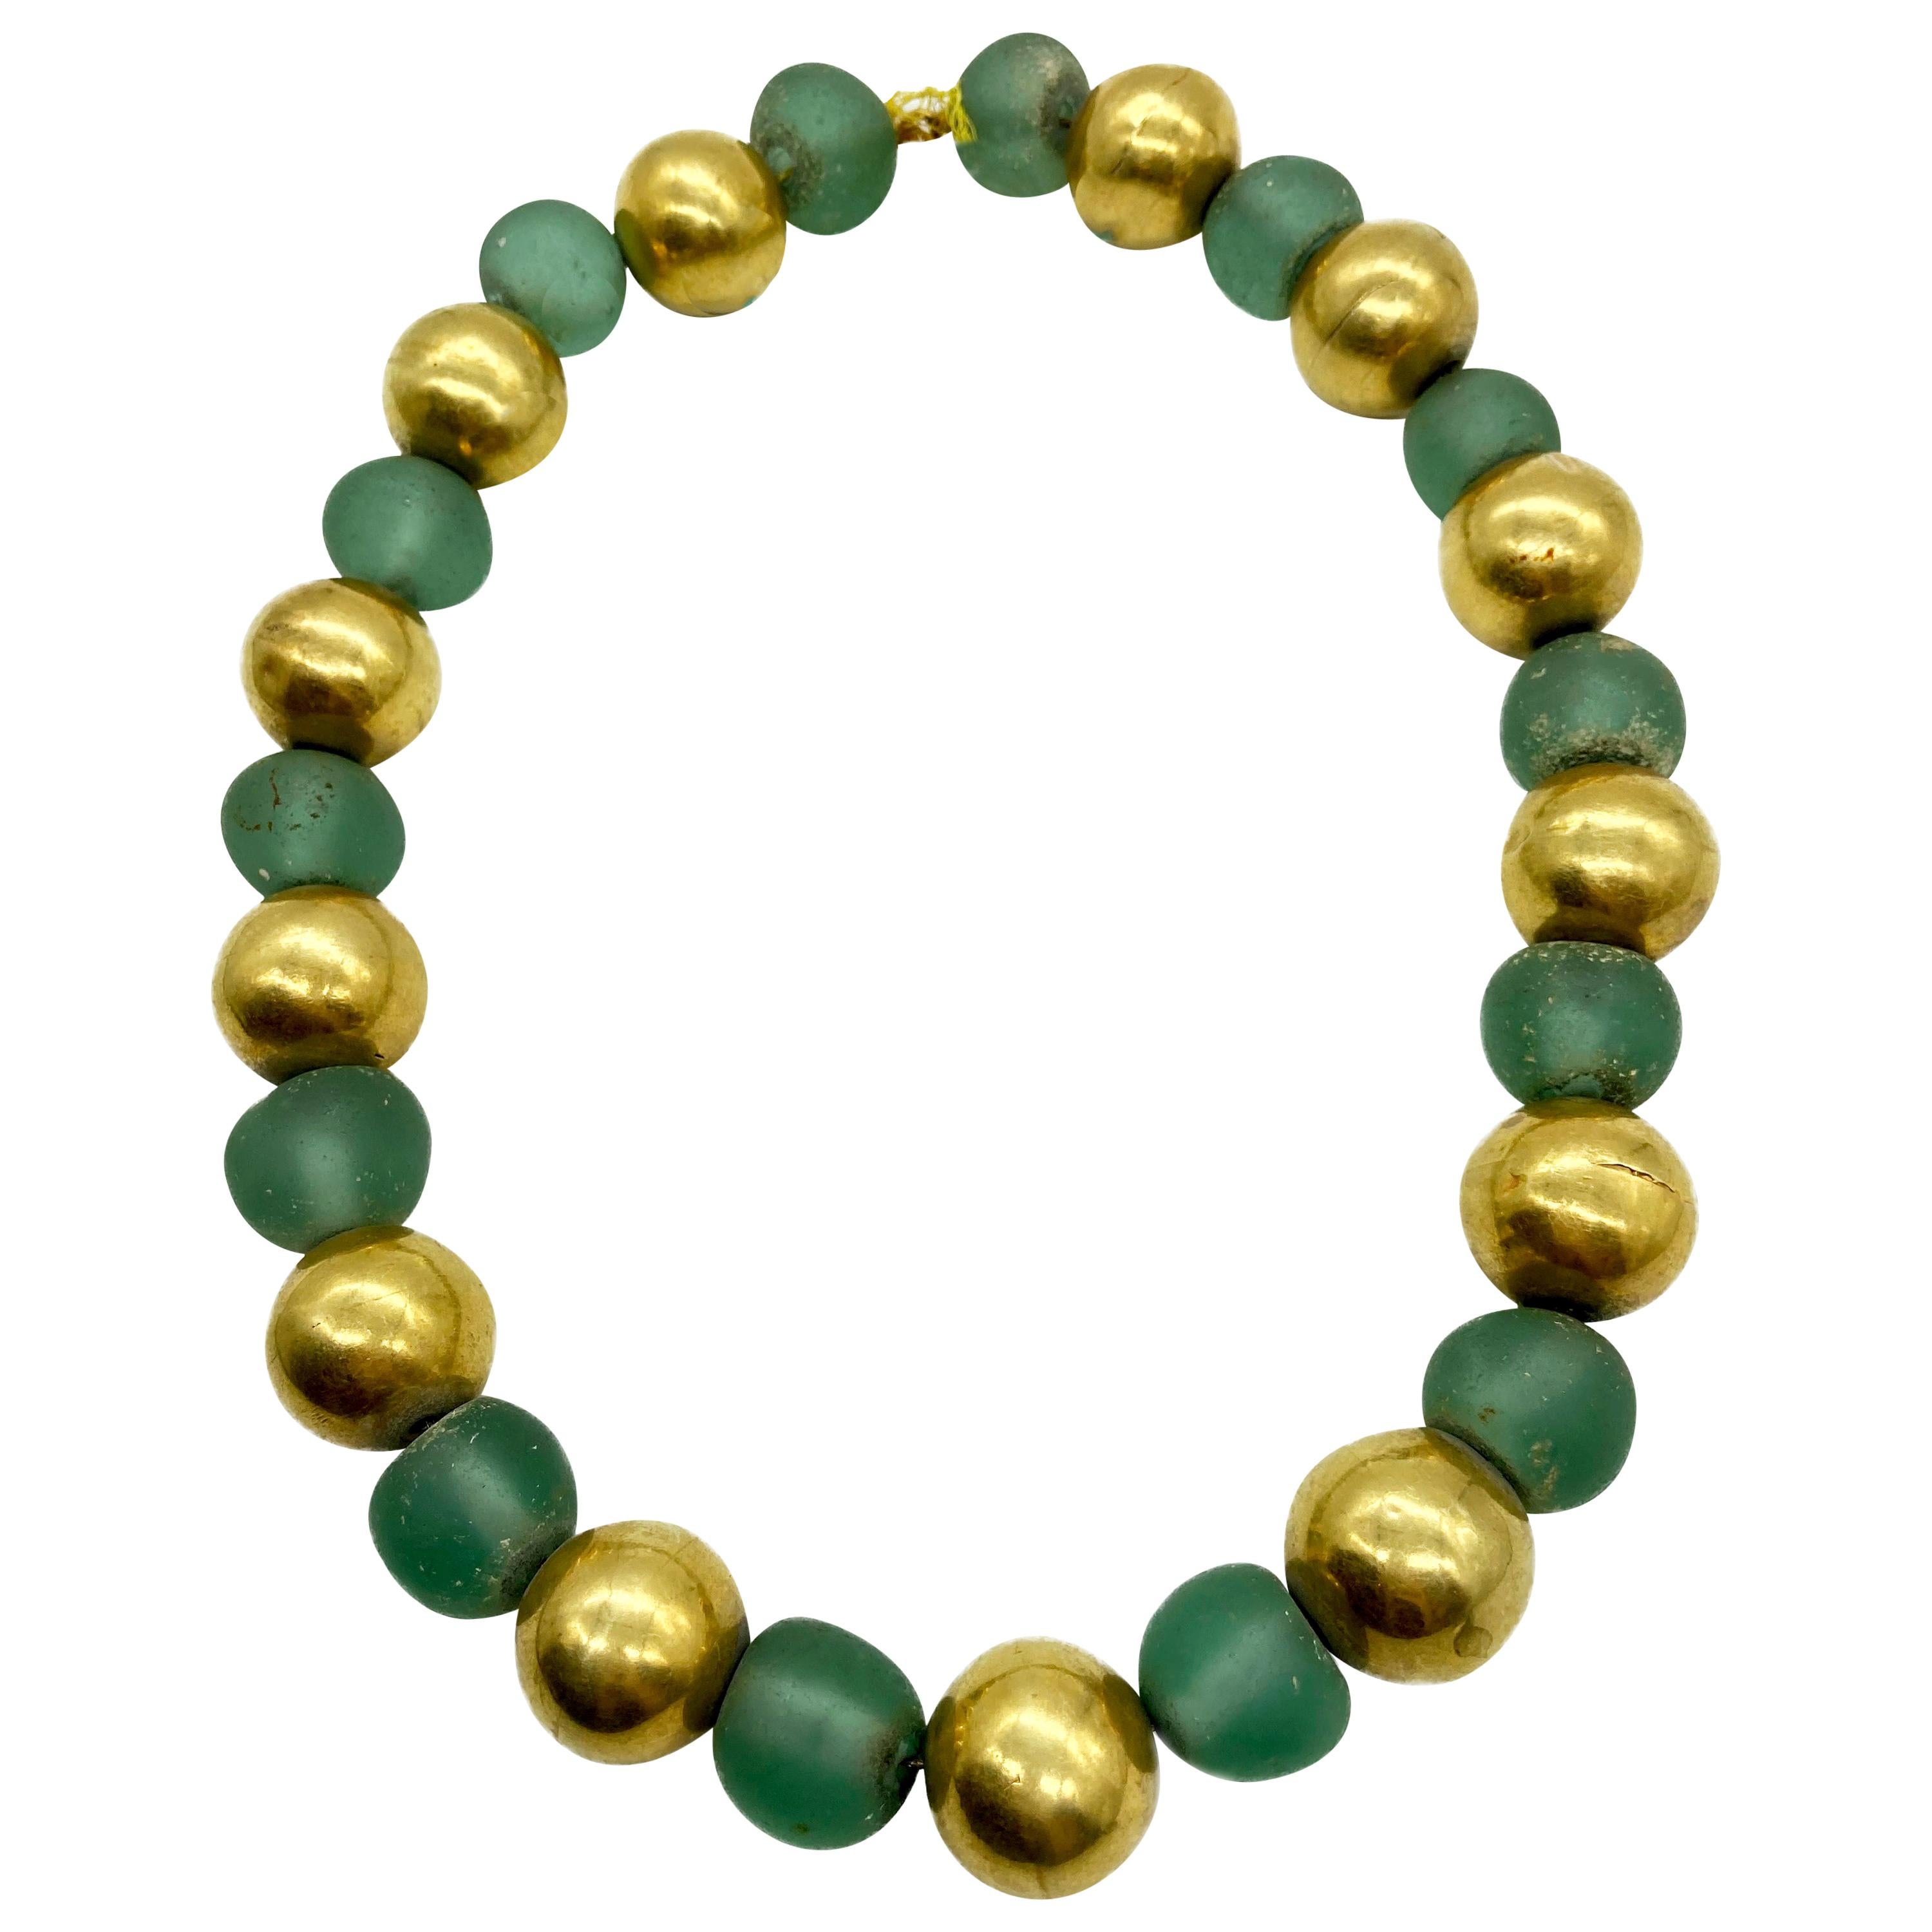 Ancient Green Glass and Yellow Gold Beads Necklace